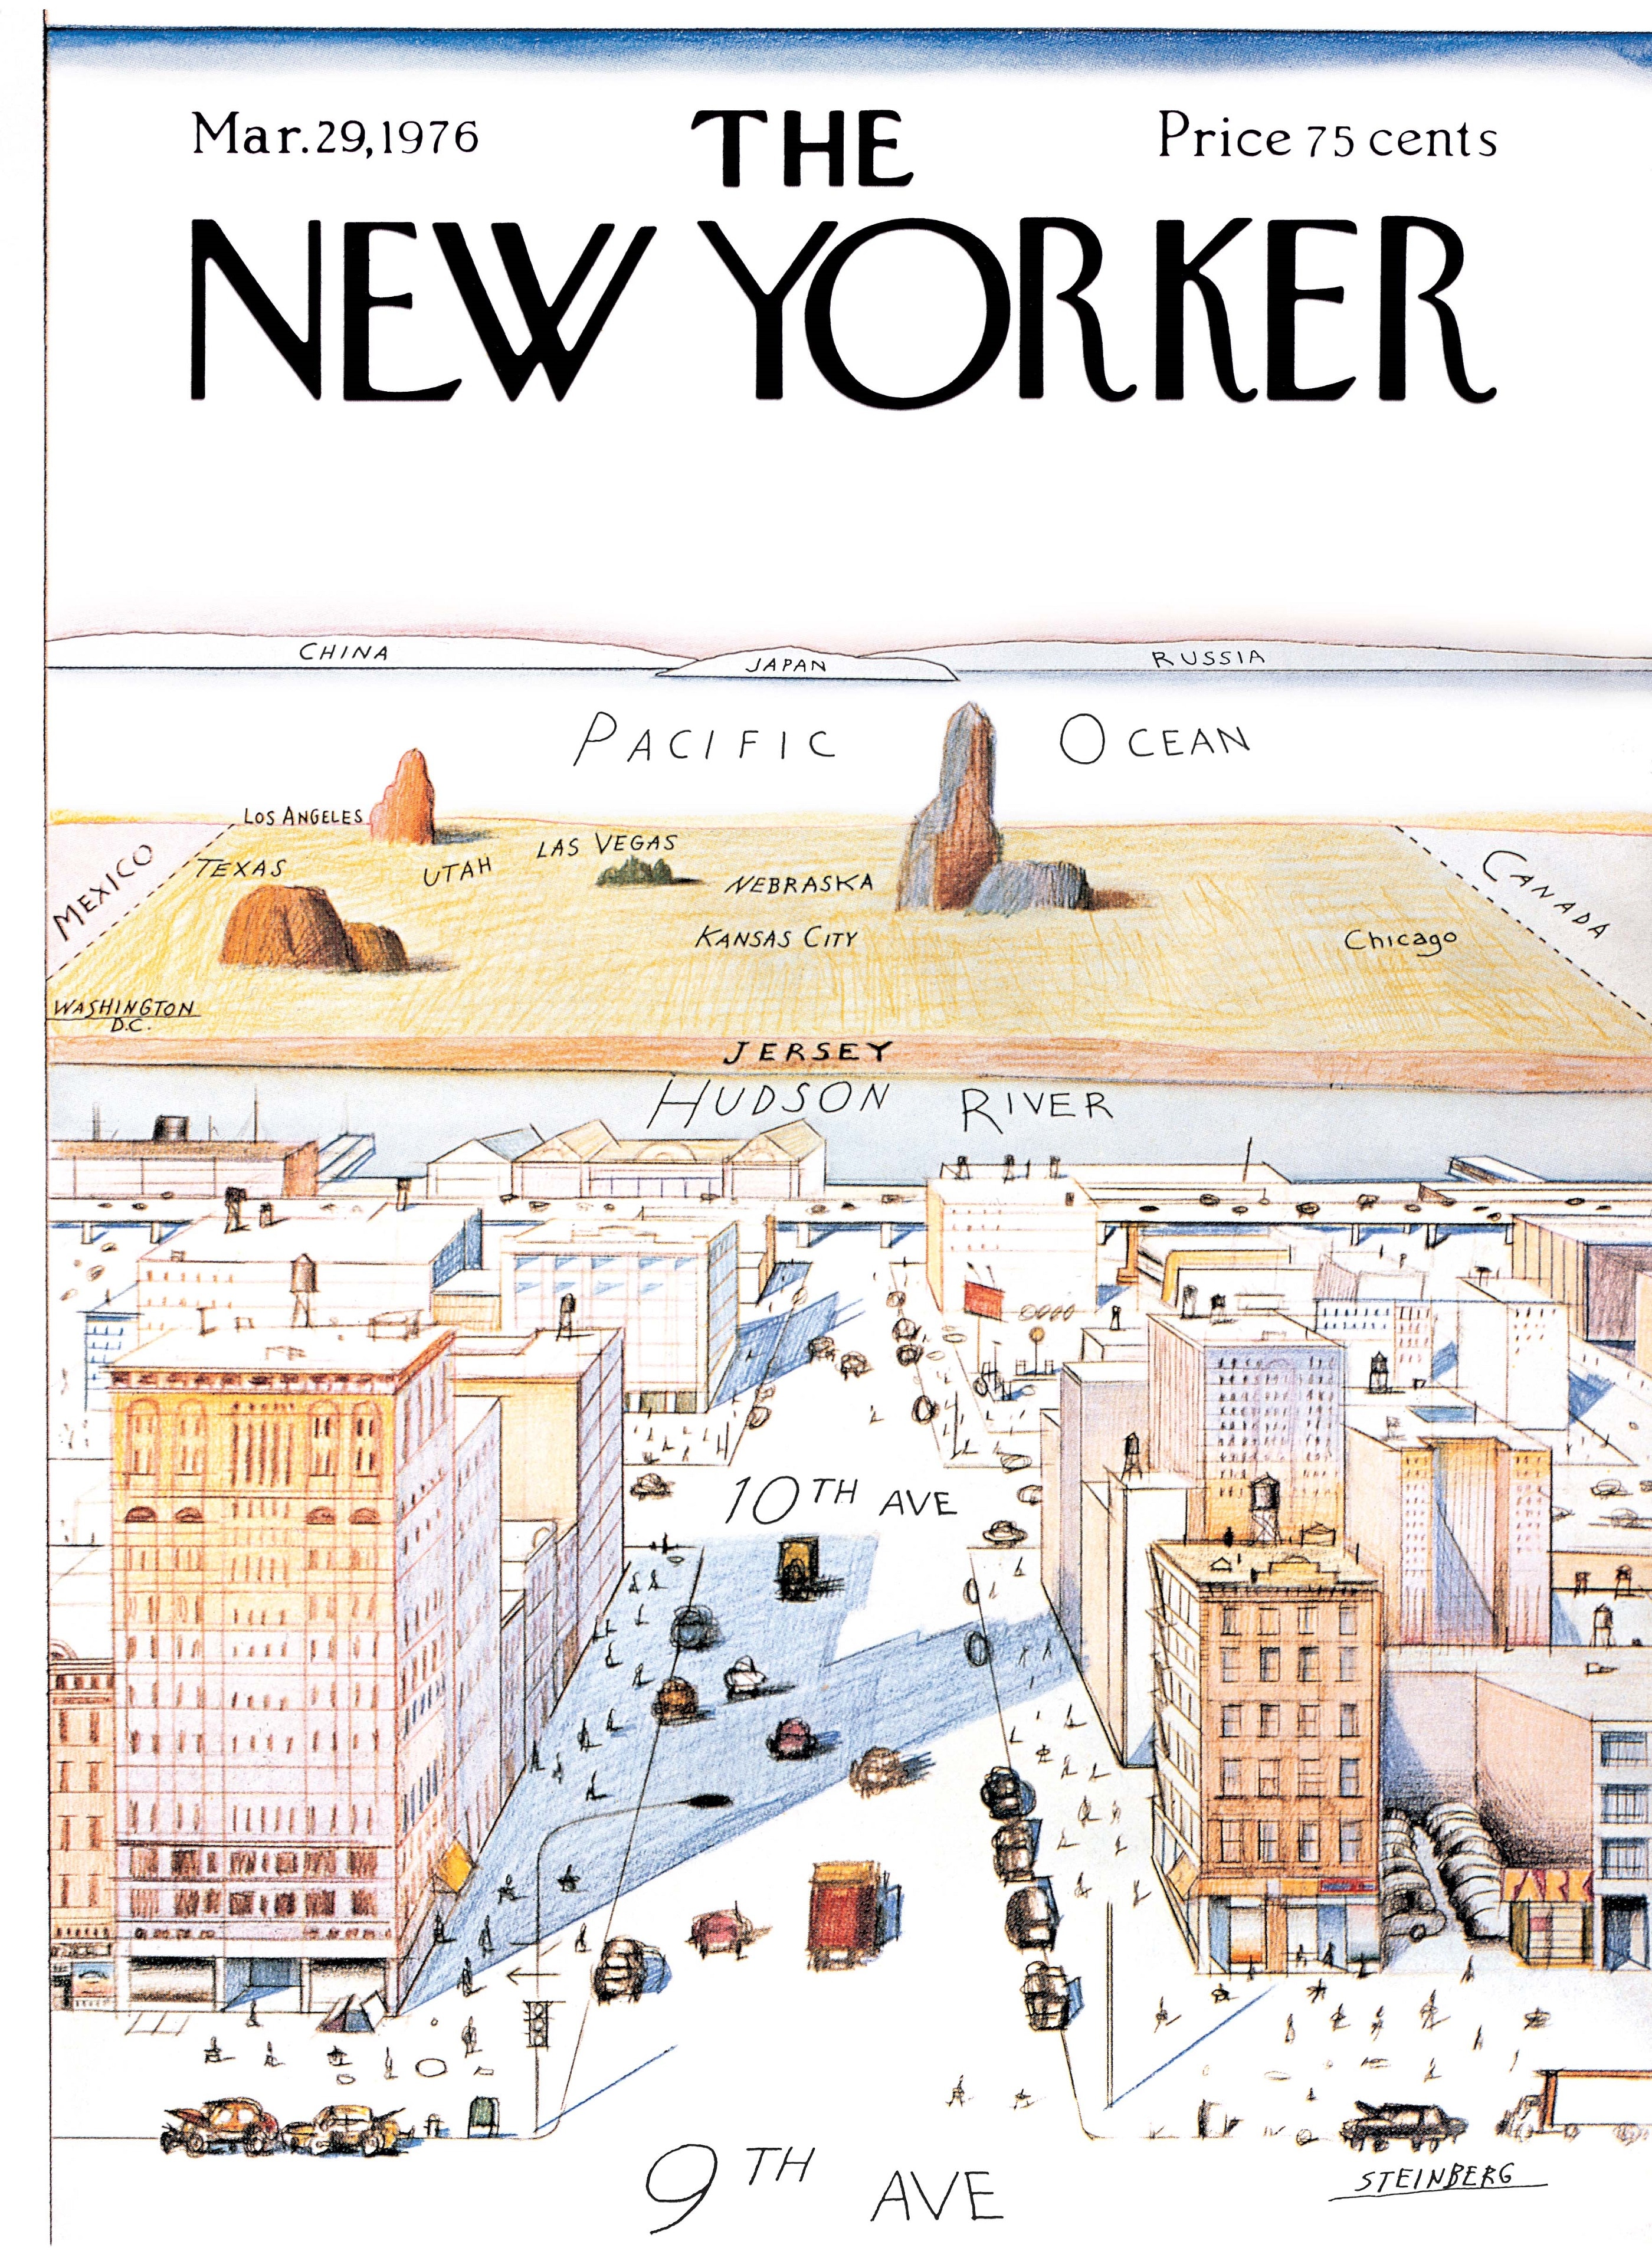 Saul Steinberg, Copertina del "The New Yorker", 29 Marzo 1976, © The Saul Steinberg Foundation /Artists Rights Society (ARS), New York 